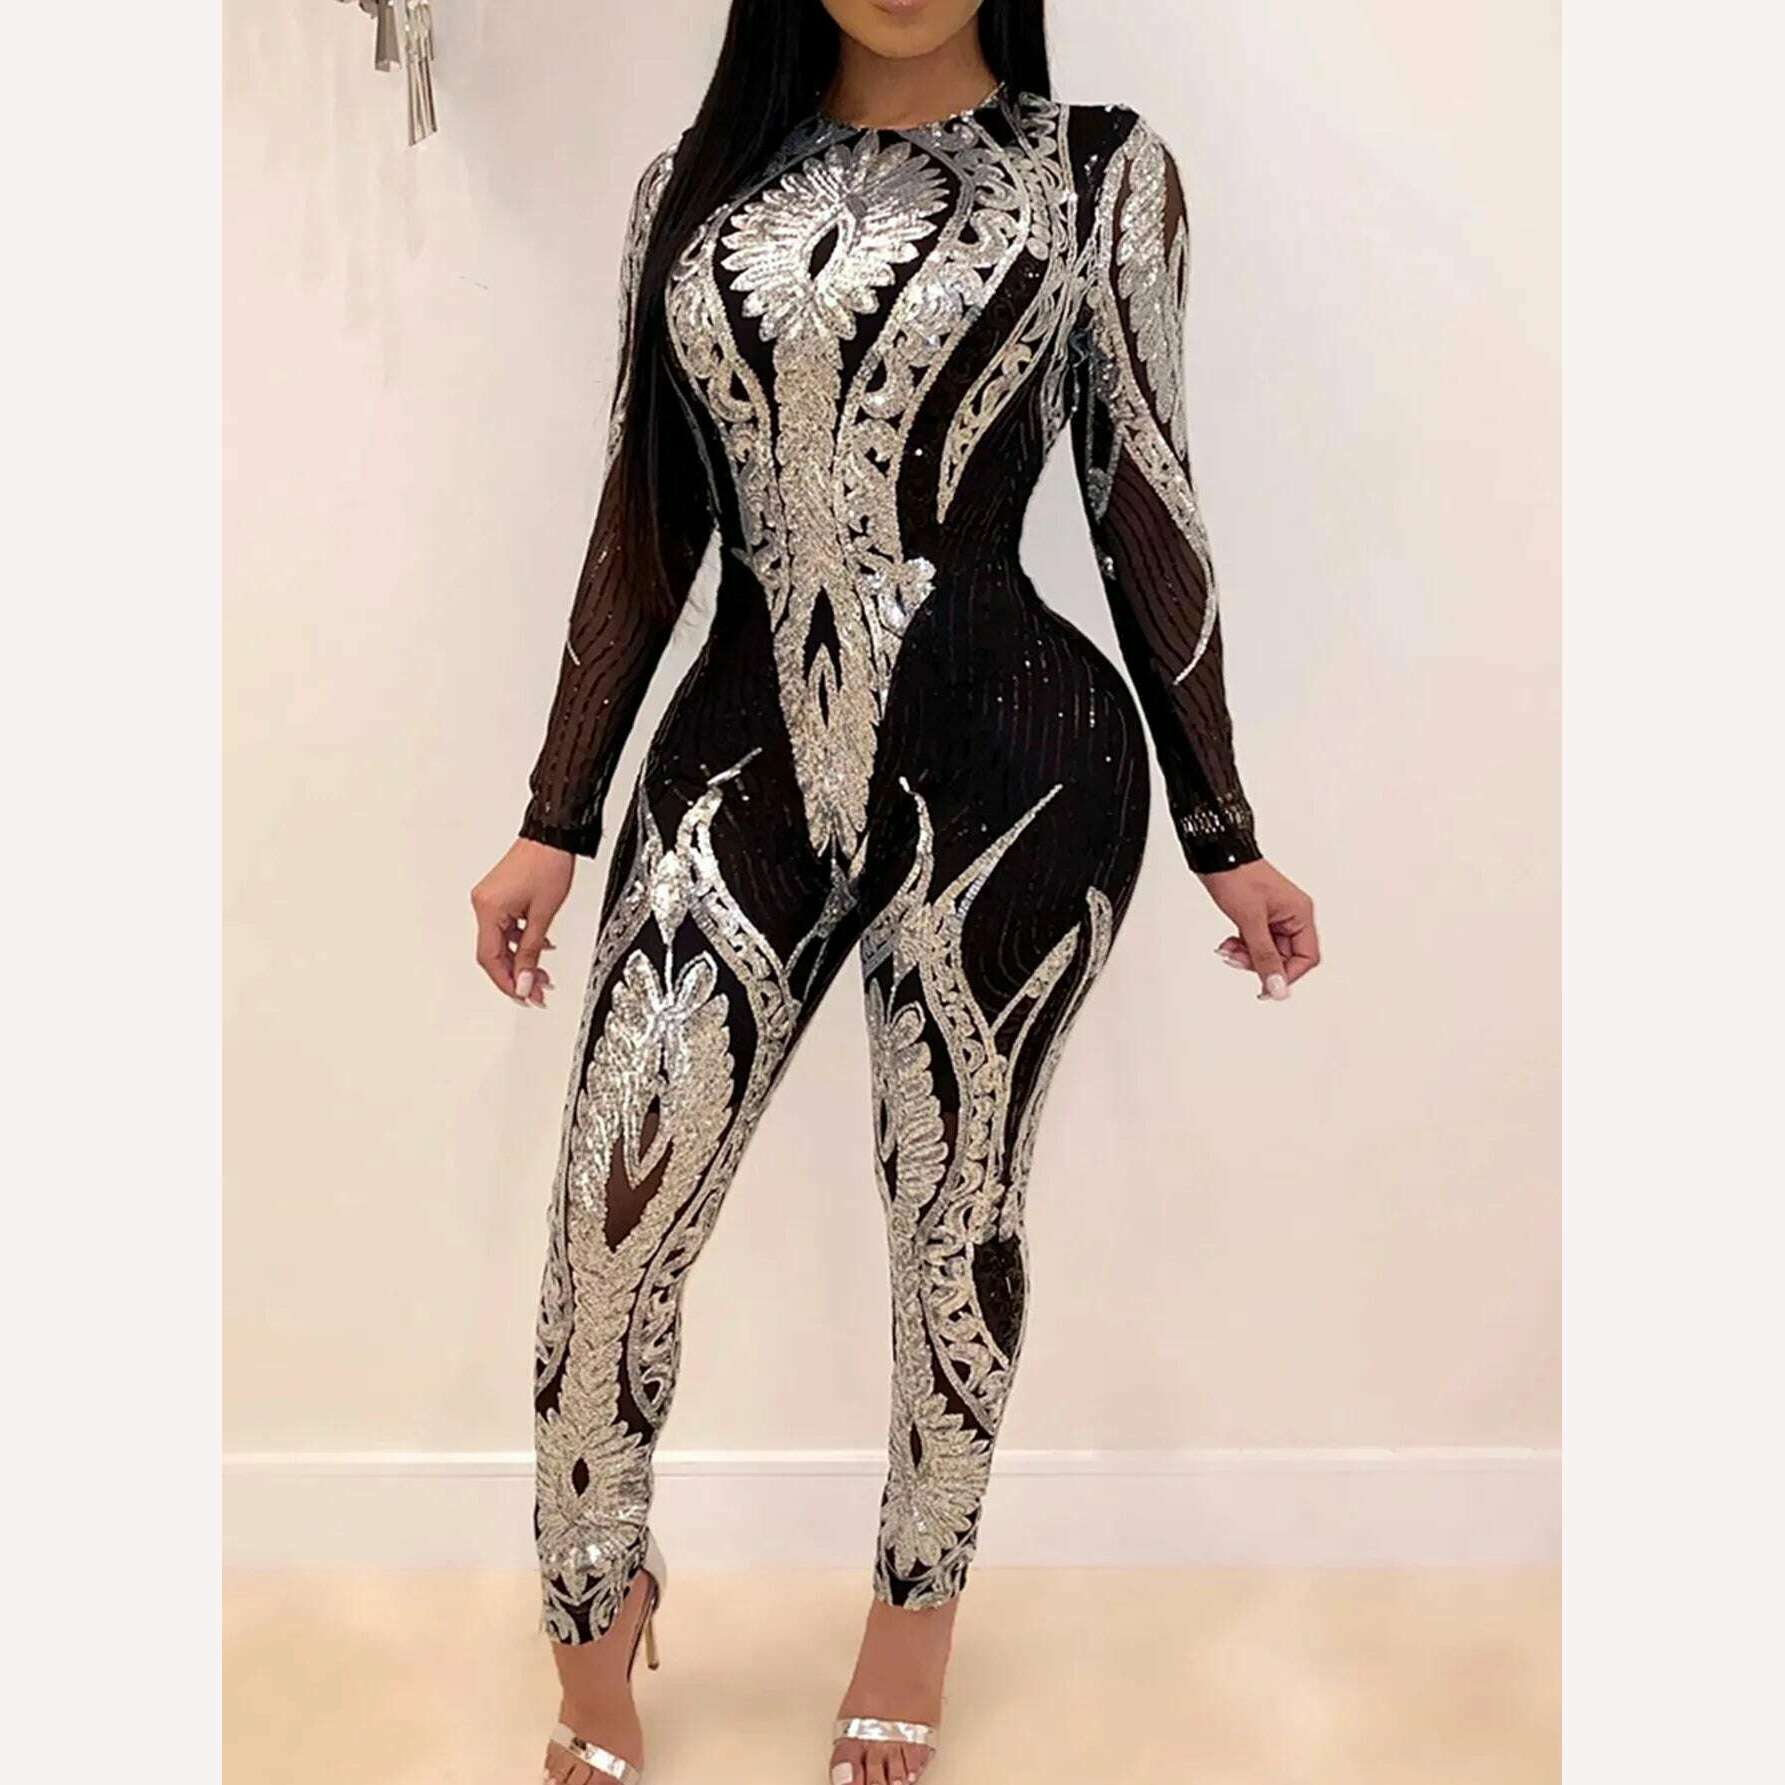 KIMLUD, Sexy Long sleeve Sequin bodycon jumpsuit women body bodysuit one piece birthday party nightclub outfits womens jumpsuits overall, Silver / S, KIMLUD Women's Clothes